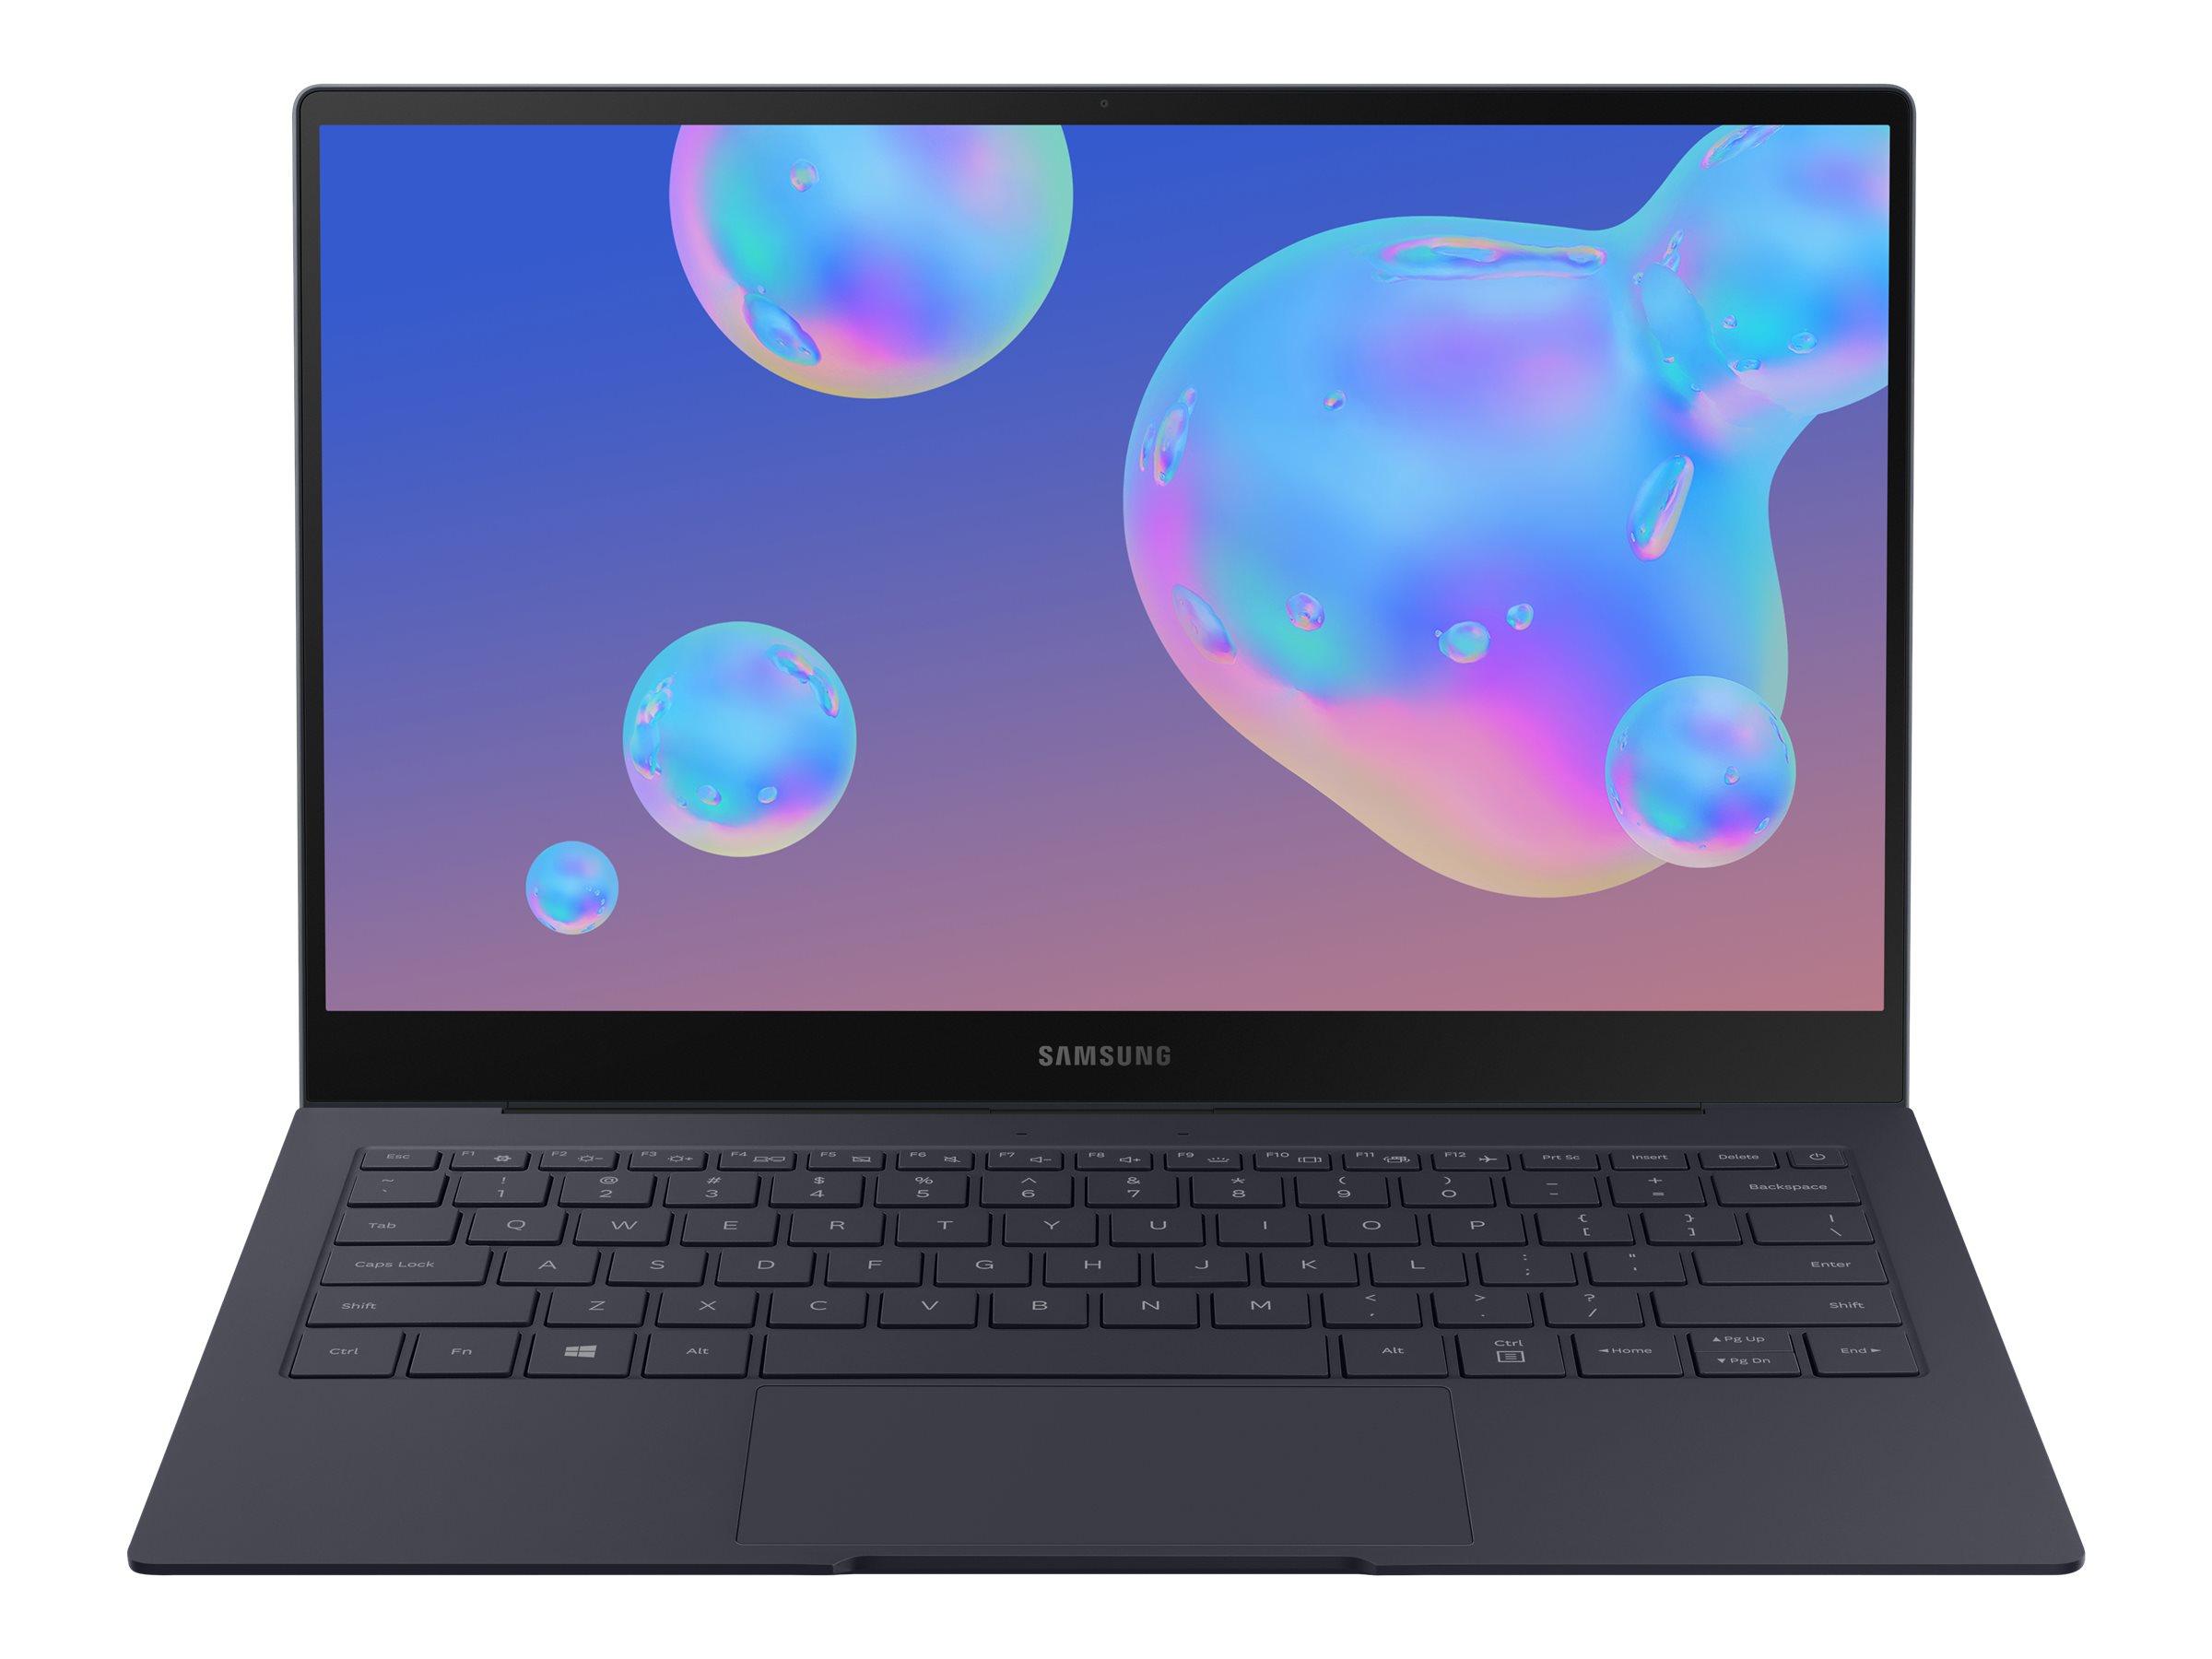 Samsung Galaxy Book Go - full specs, details and review